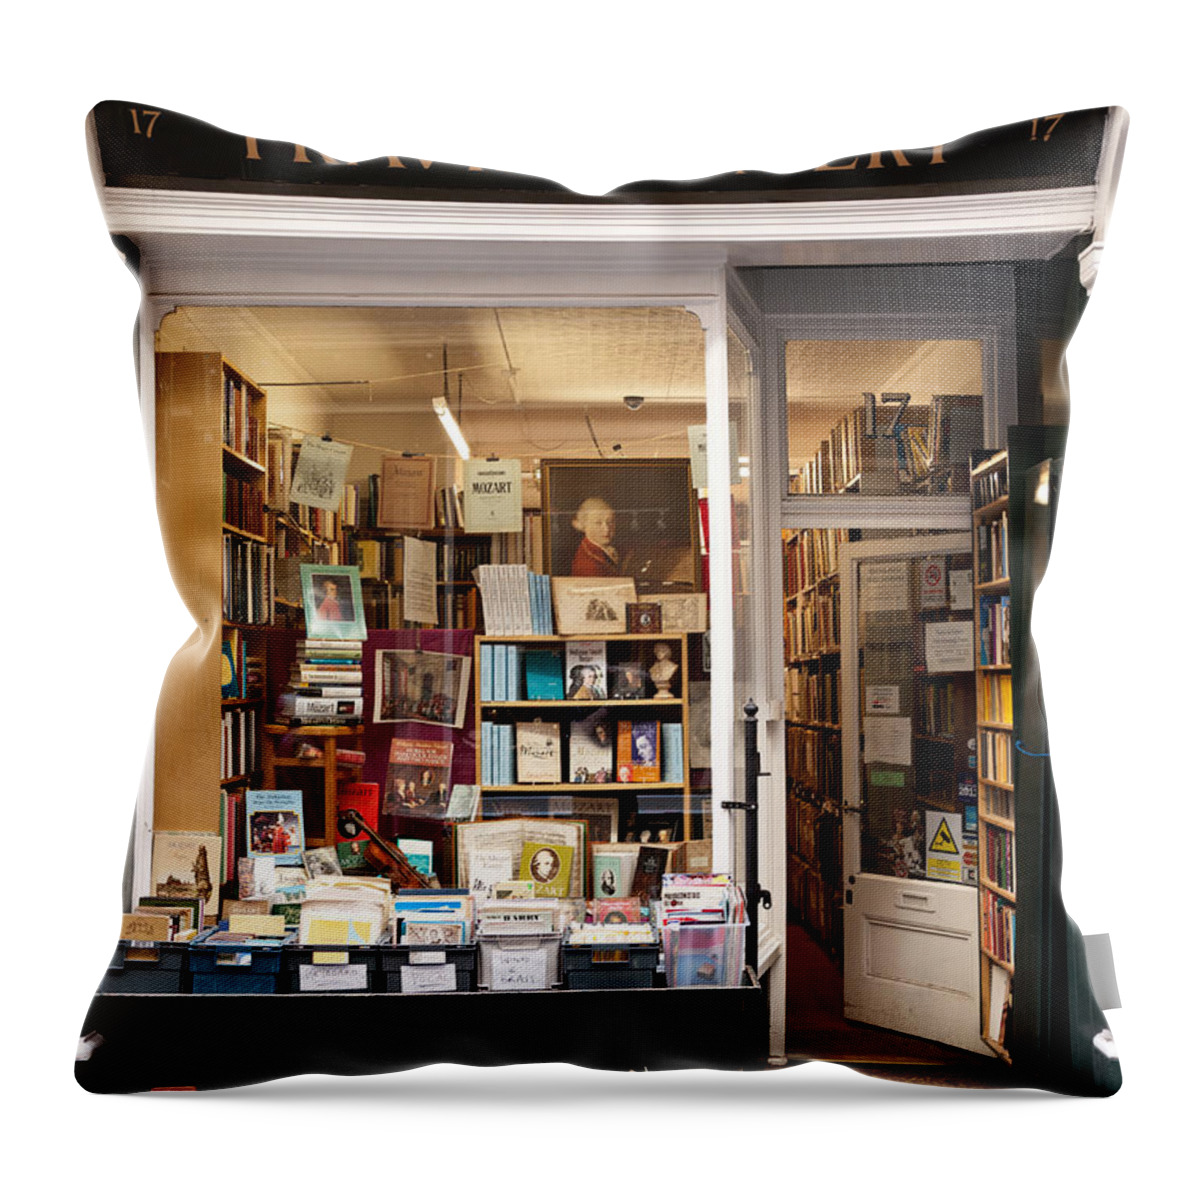 London Throw Pillow featuring the photograph The Old Bookshop by Rick Piper Photography